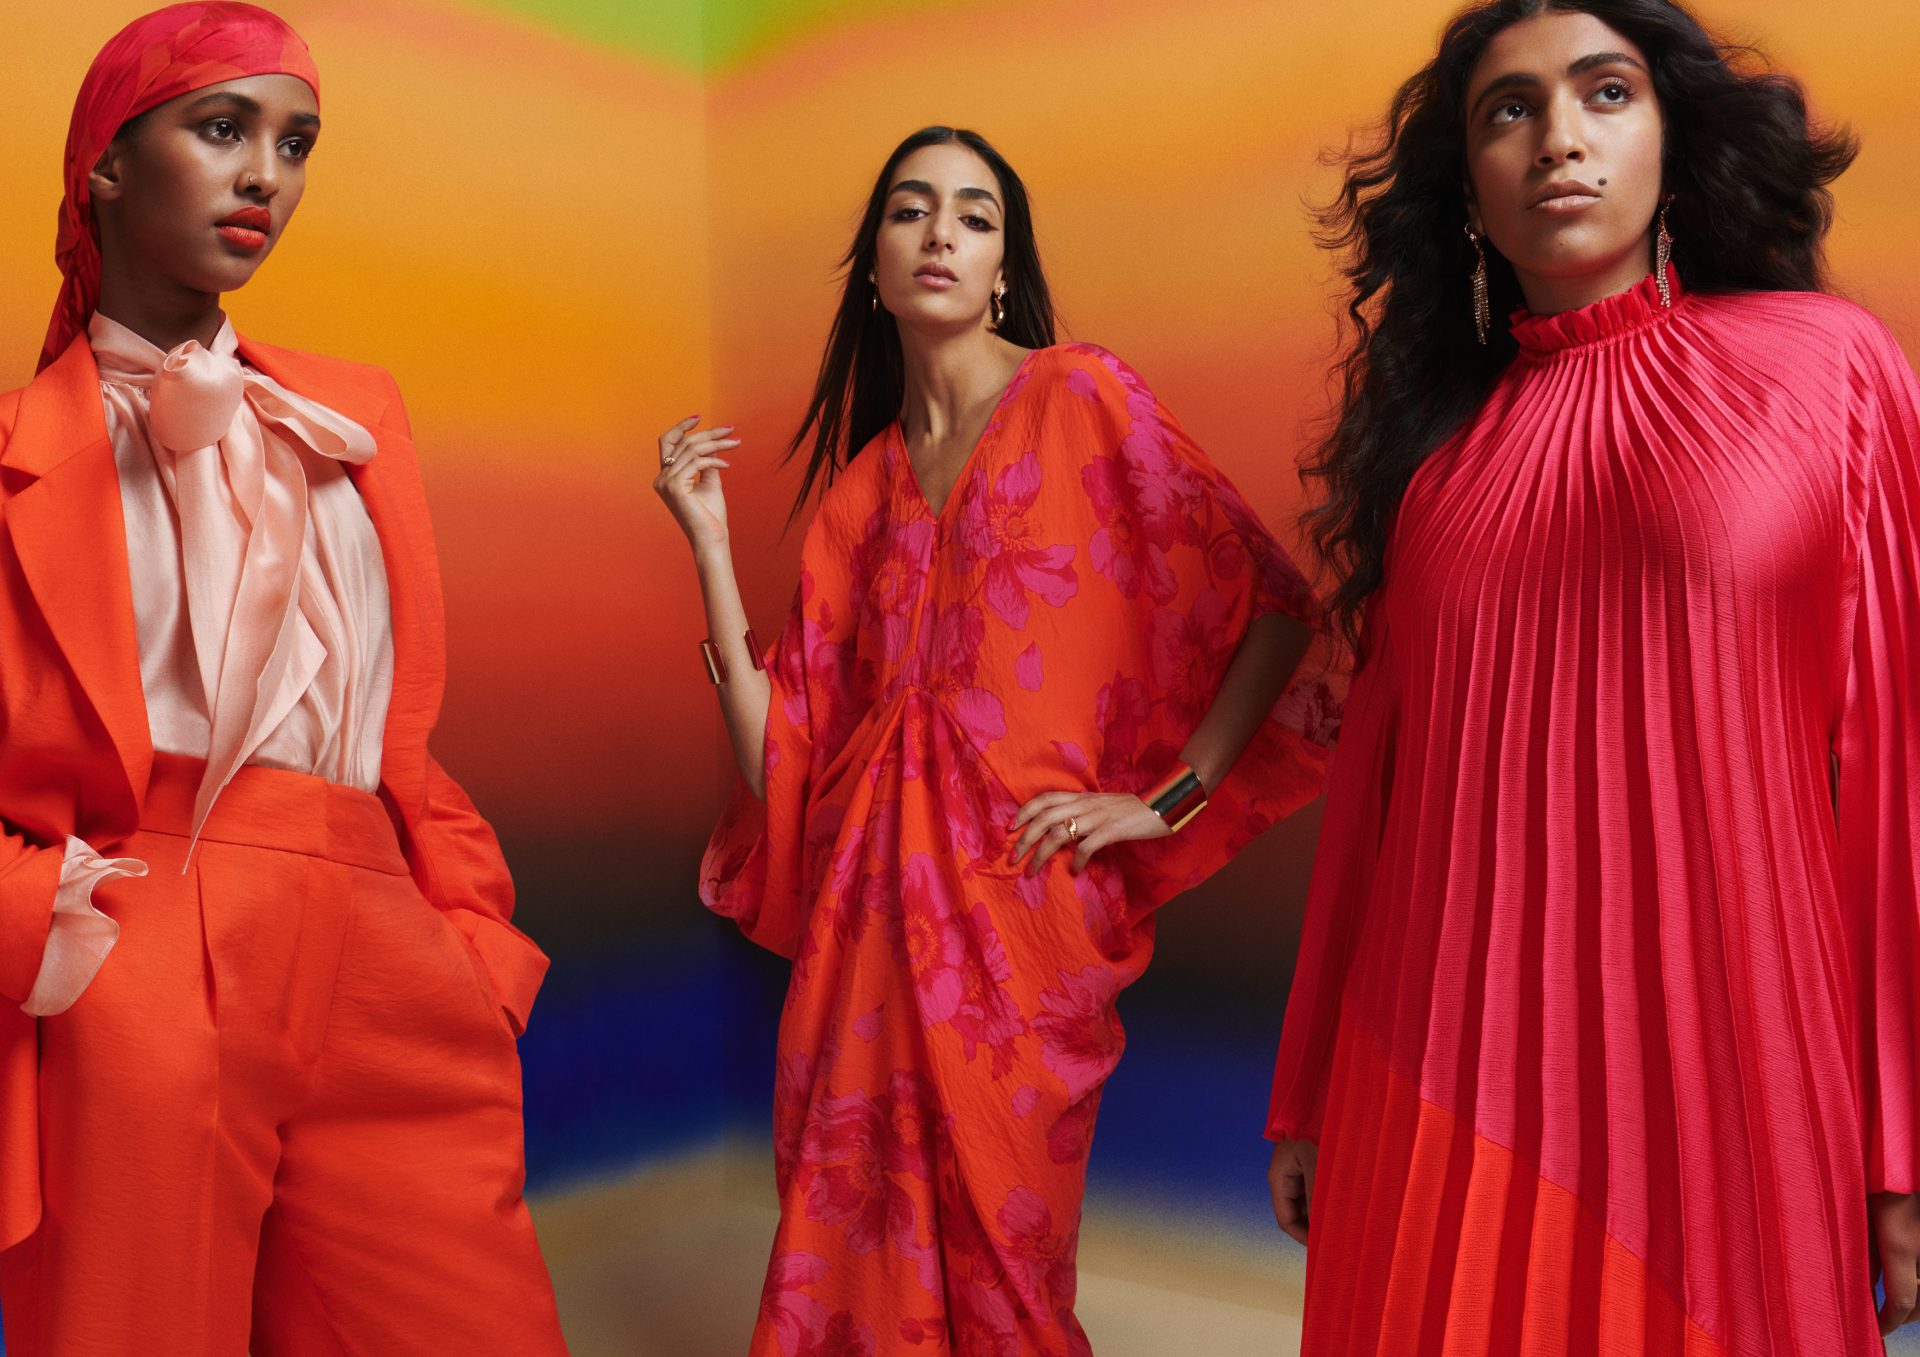 The Ramadan 2022 capsule collections you do not want to miss